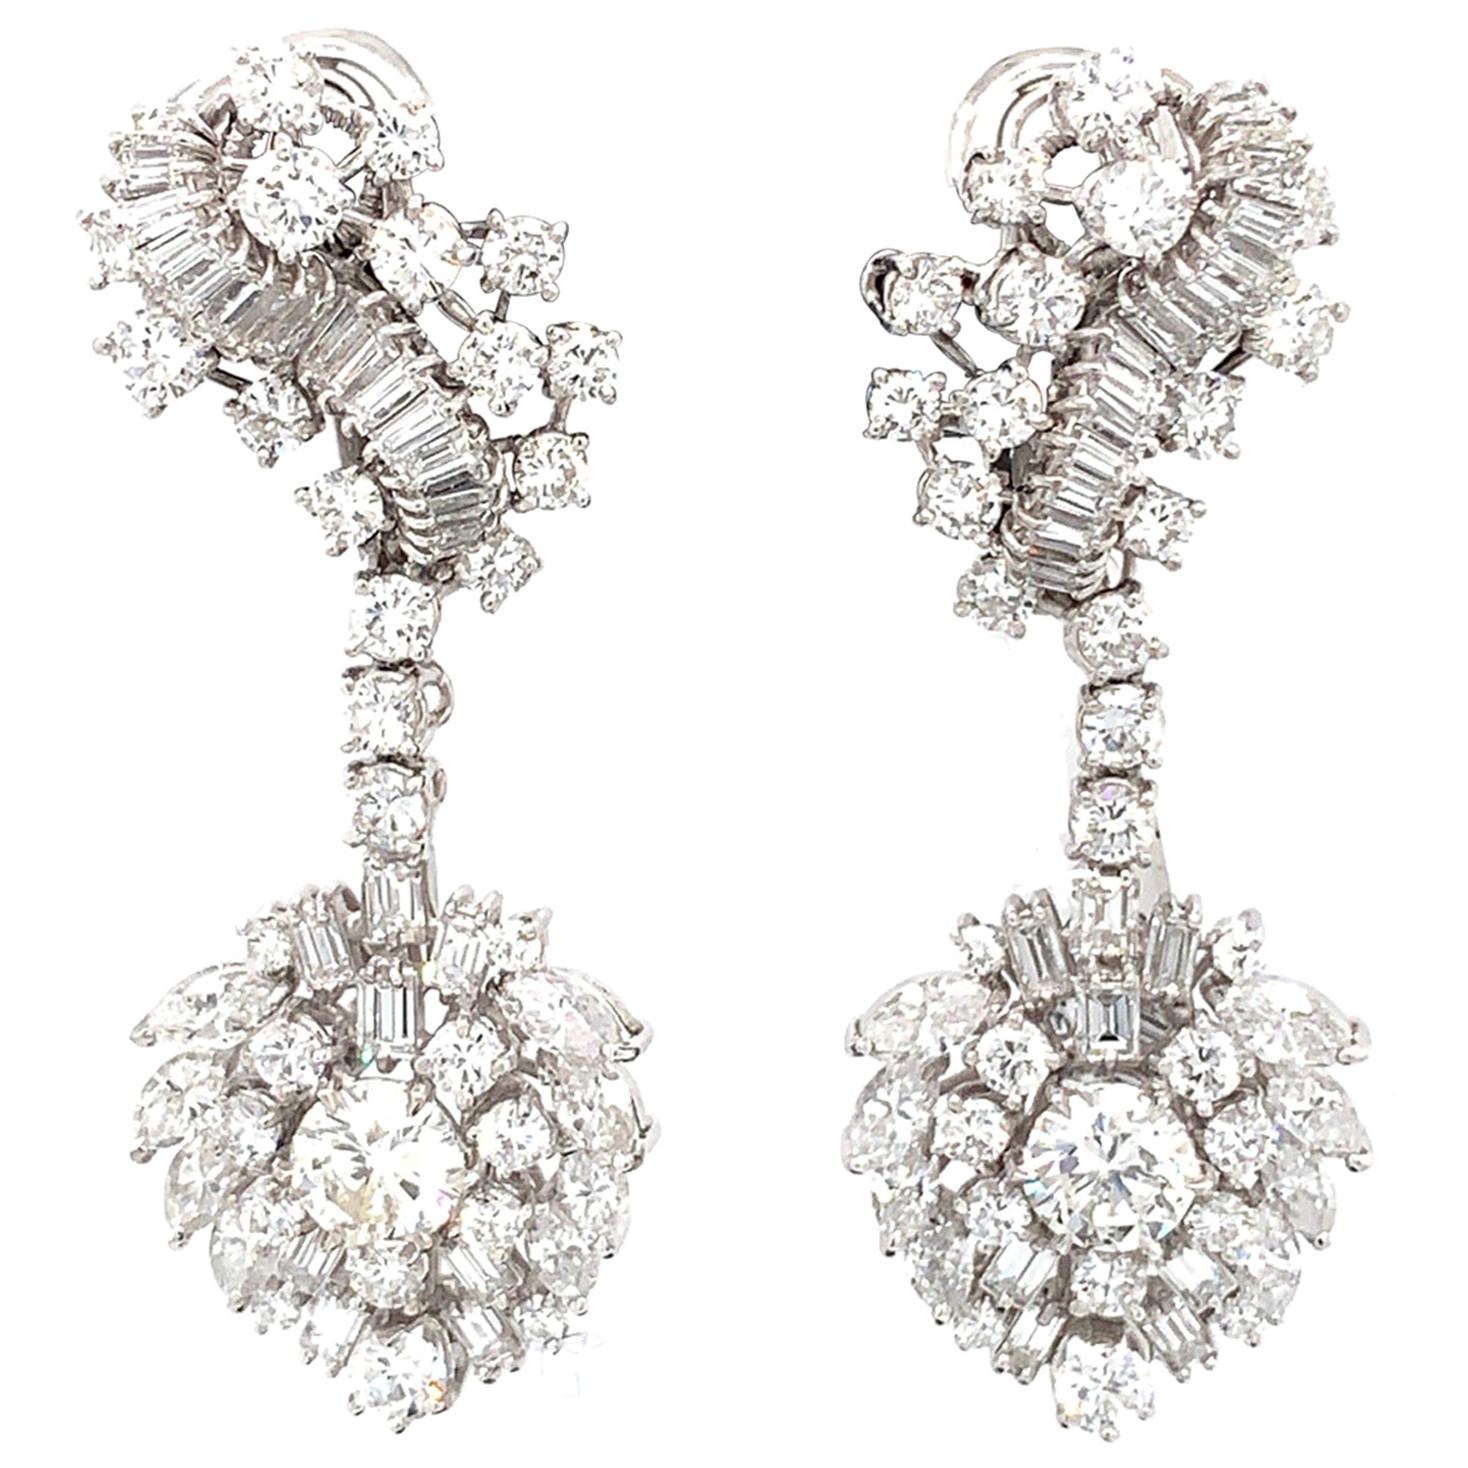 10 Carat Round and Fancy Shaped Diamond 18 Karat White Gold Cluster Earrings